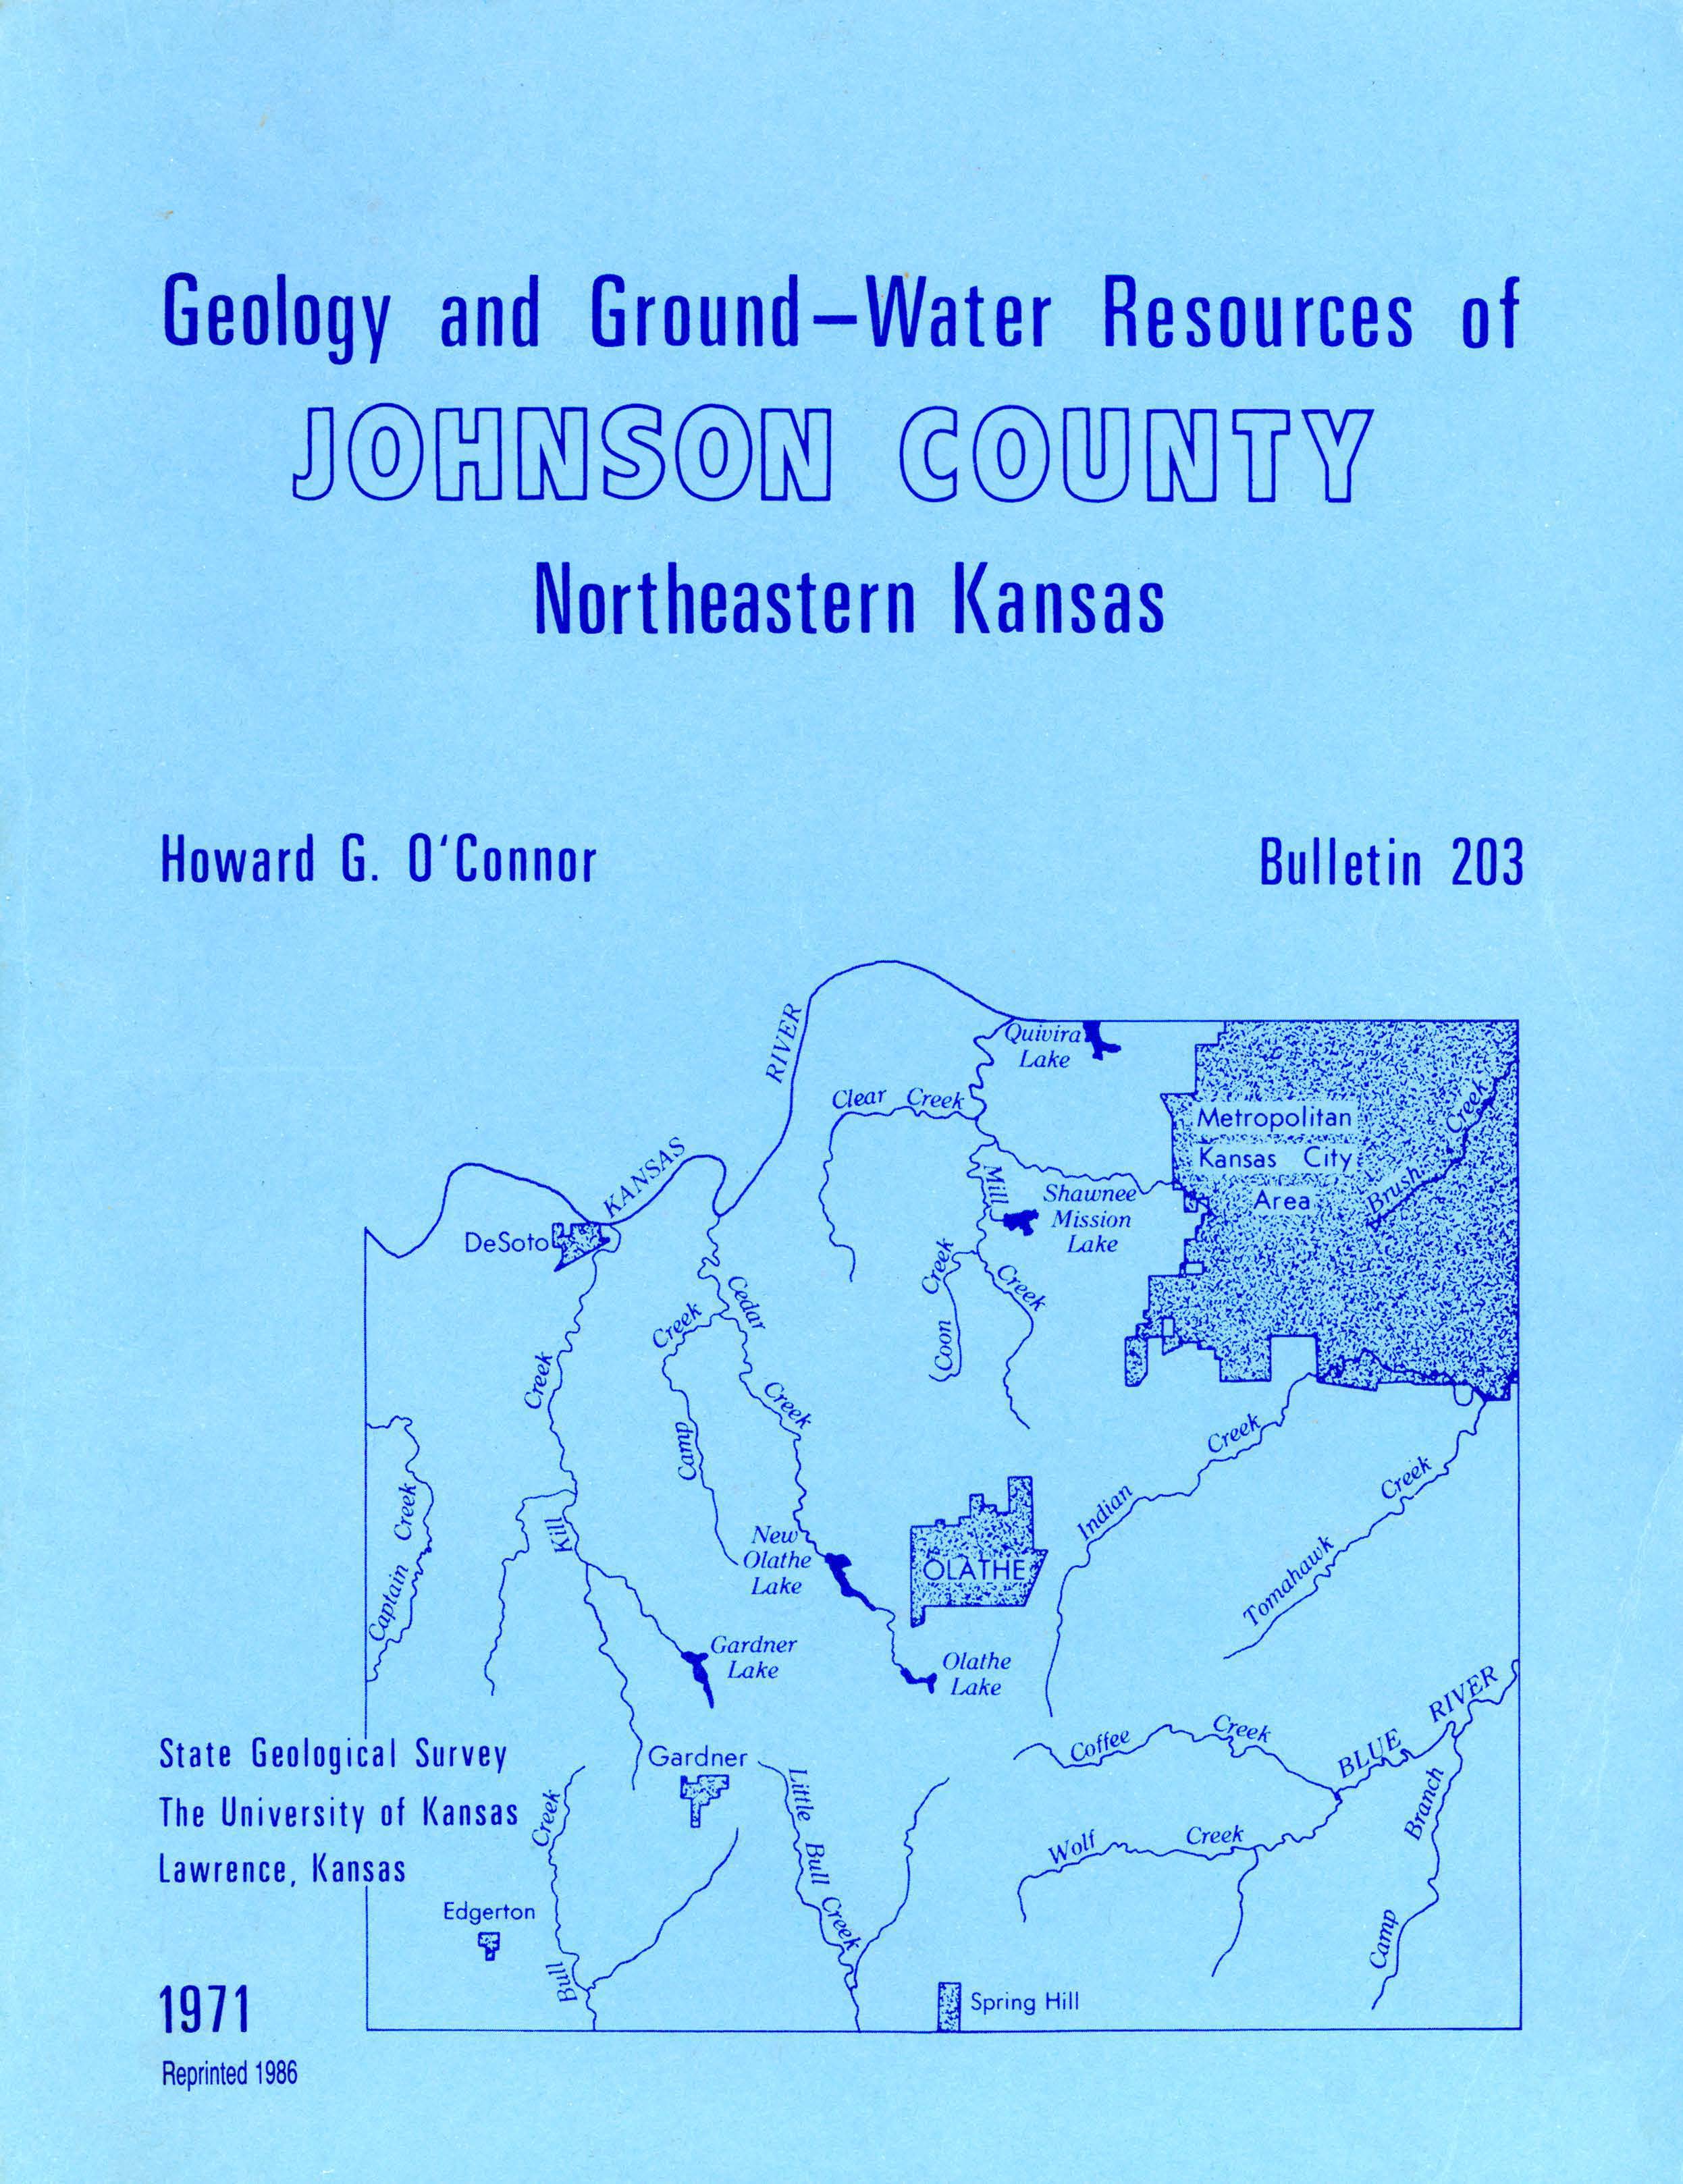 					View No. 203 (1971): Geology and Ground-Water Resources of Johnson County, Northeastern Kansas
				